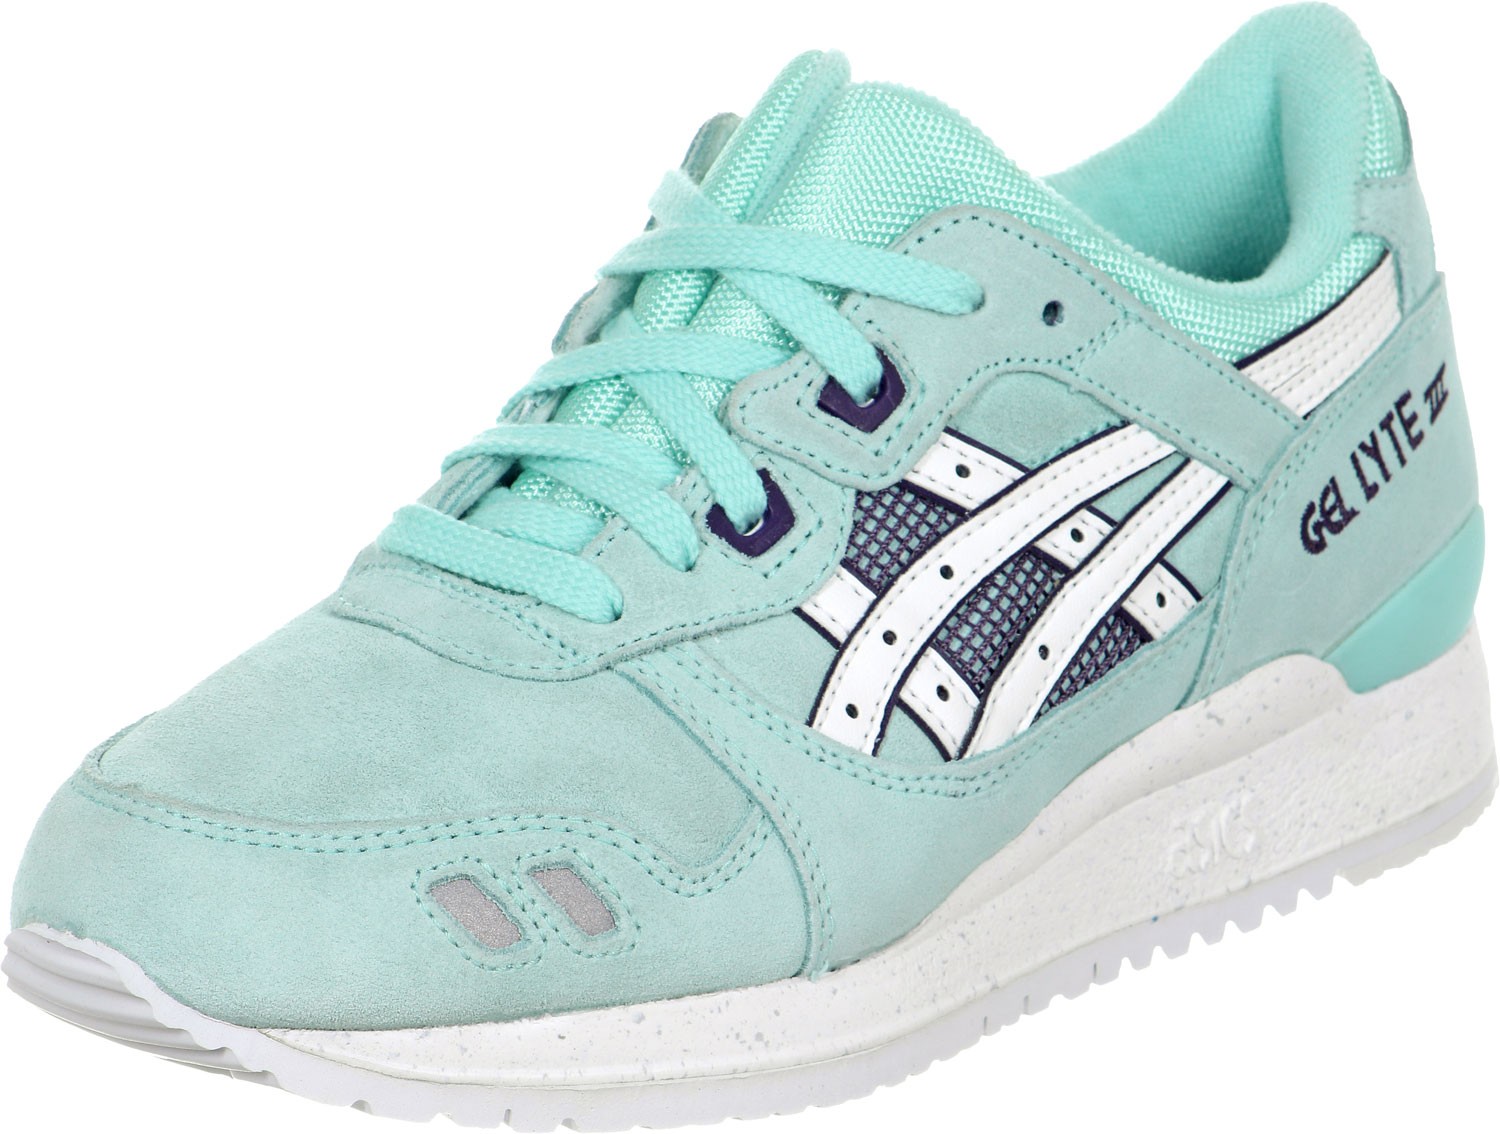 chaussures asics femme turquoise